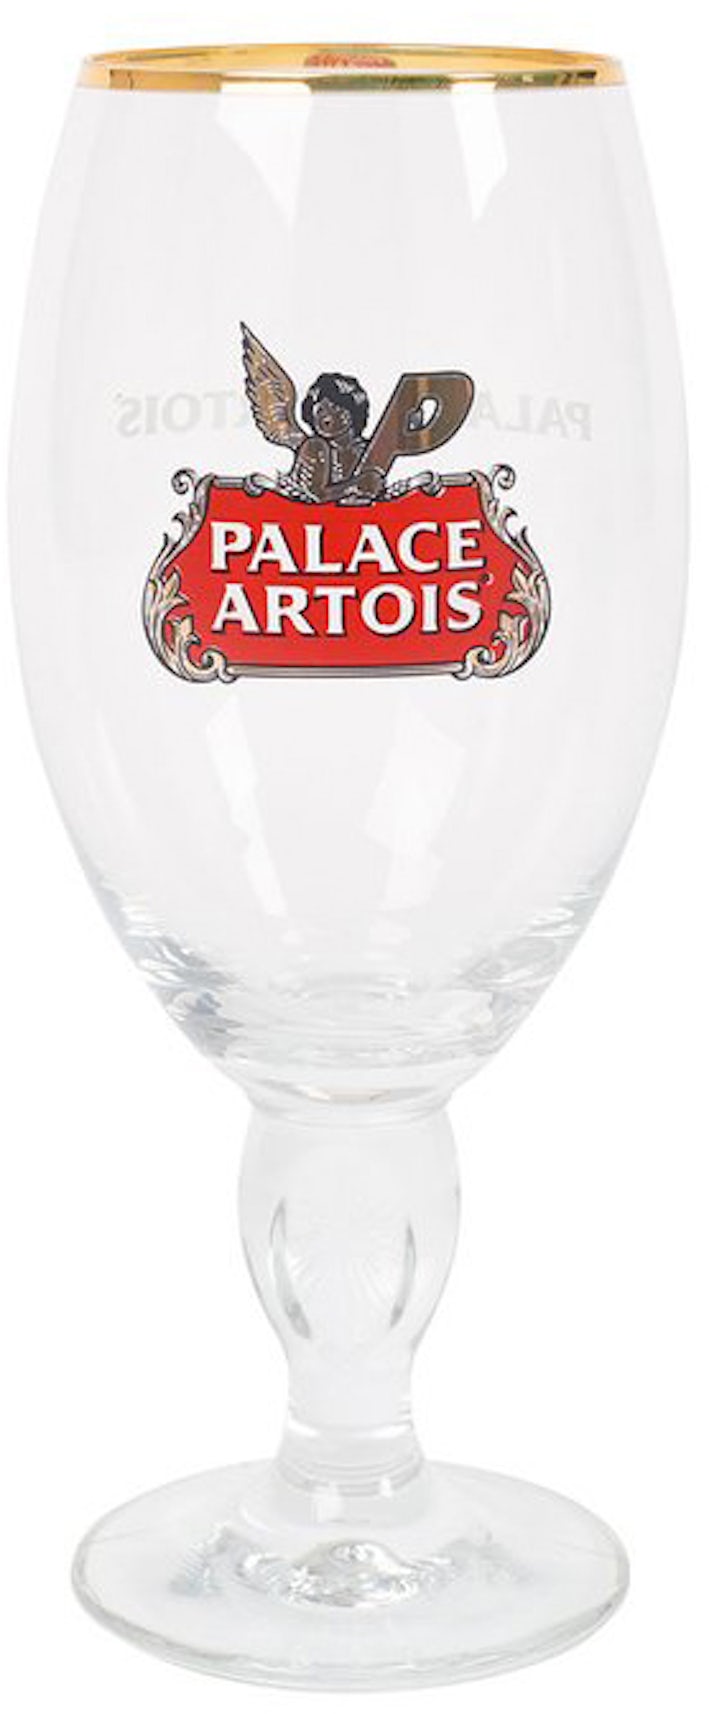 https://images.stockx.com/images/Palace-Stella-Artois-Chalice-Clear.jpg?fit=fill&bg=FFFFFF&w=1200&h=857&fm=jpg&auto=compress&dpr=2&trim=color&updated_at=1613759381&q=60